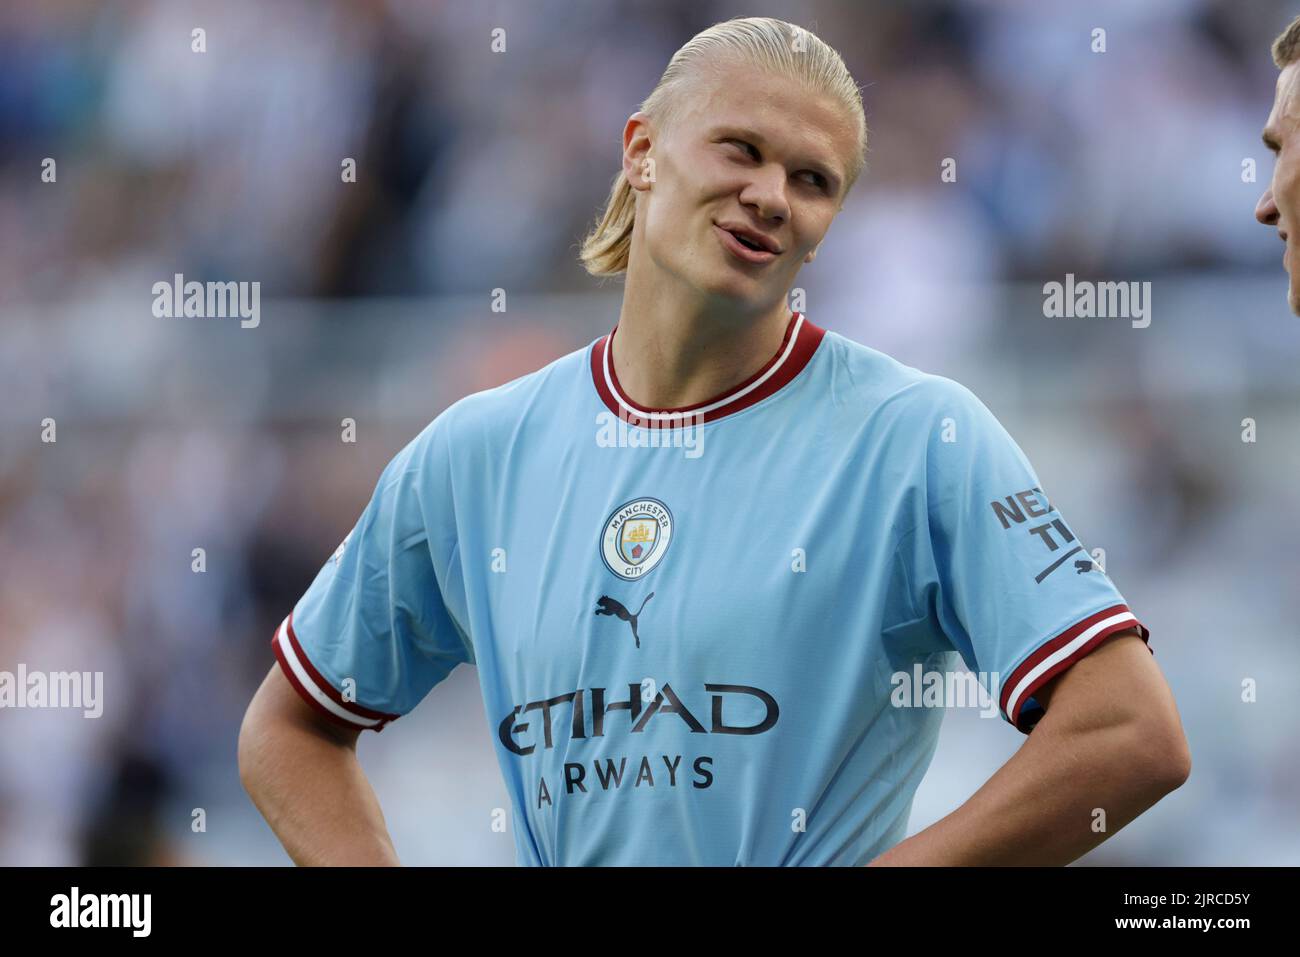 ERLING HAAL&, MANCHESTER CITY FC, 2022 Stock Photo